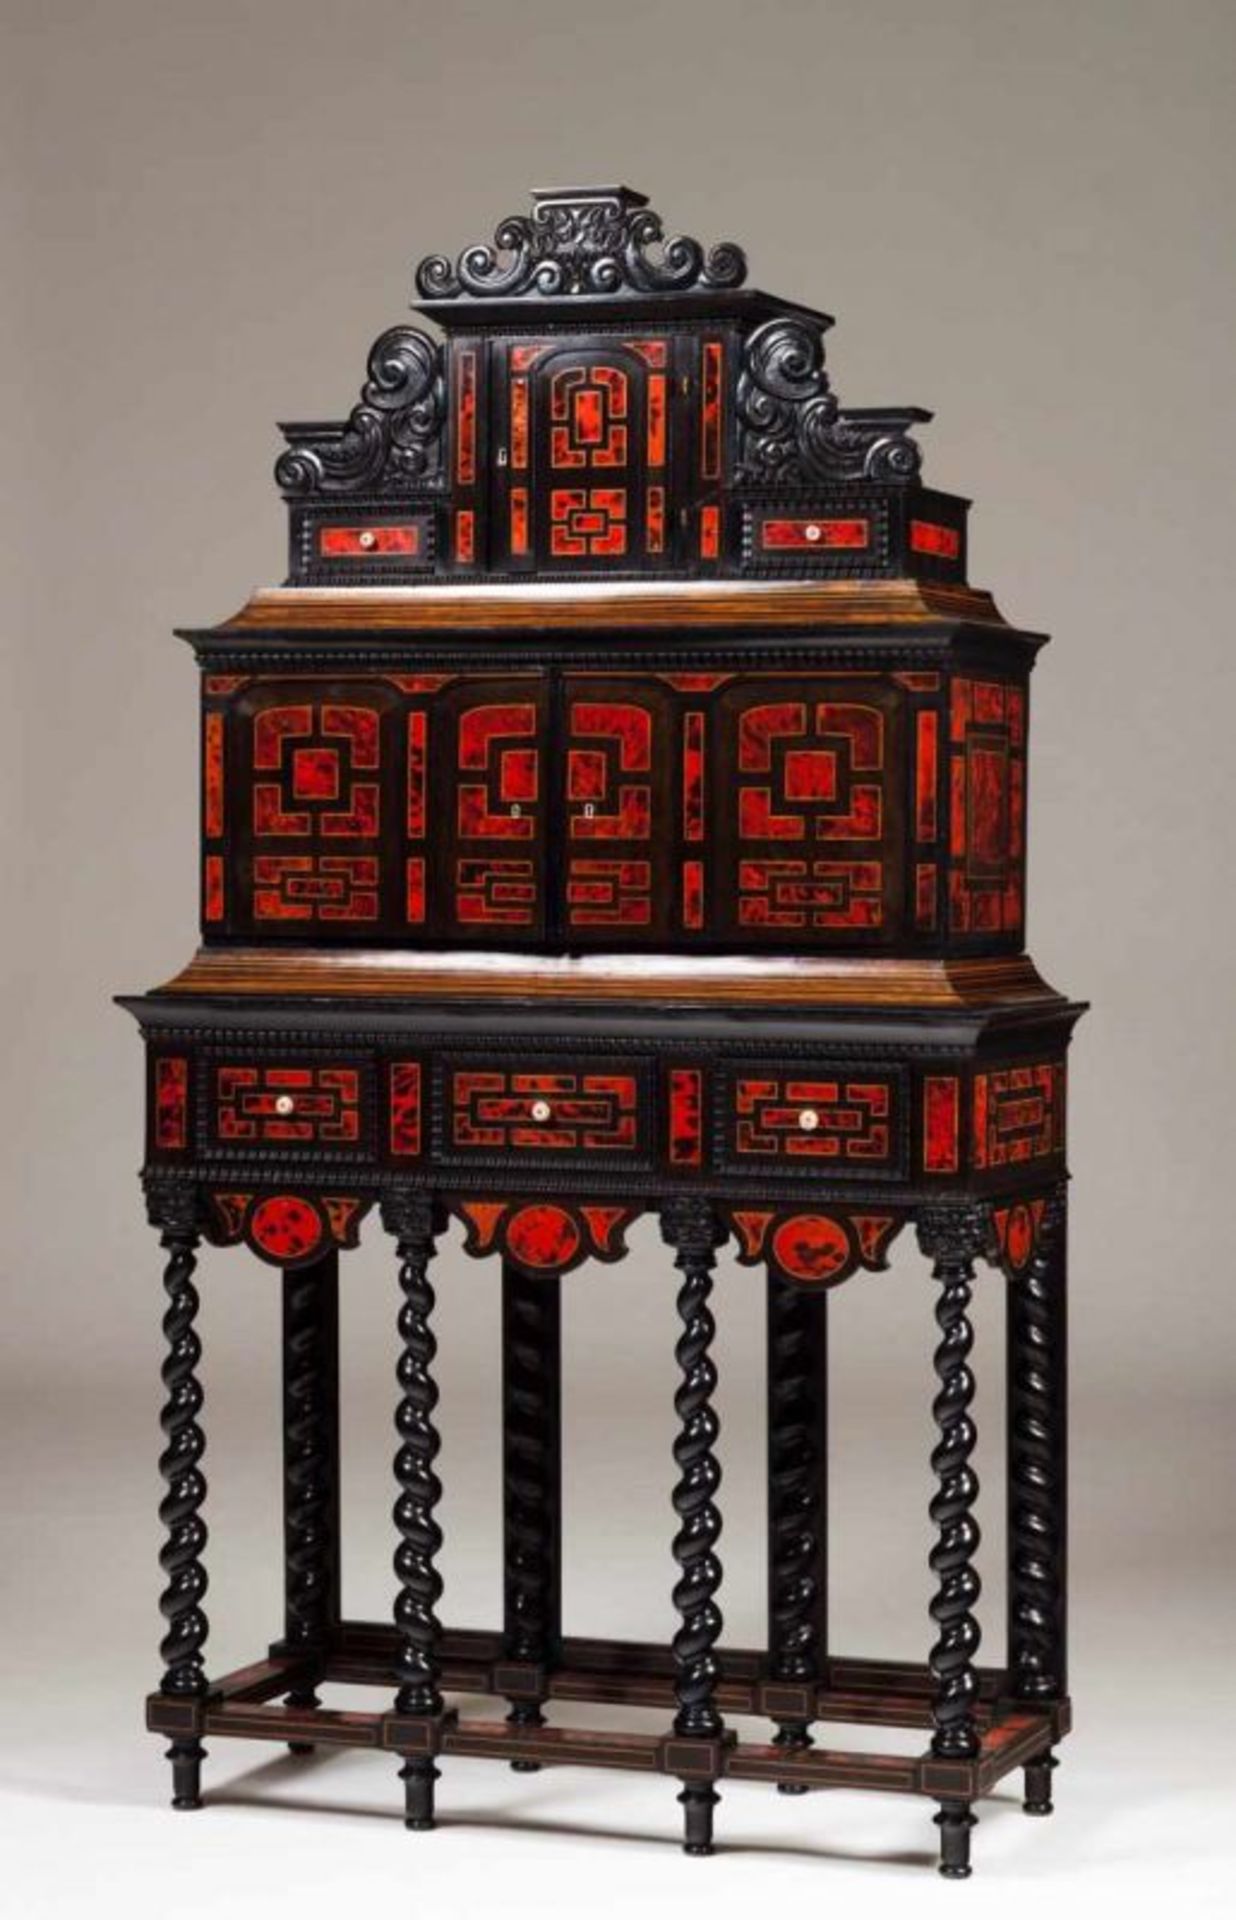 A 19th century Mannerist cabinet Ebonized wood with tortoiseshell plaques, ivory friezes and